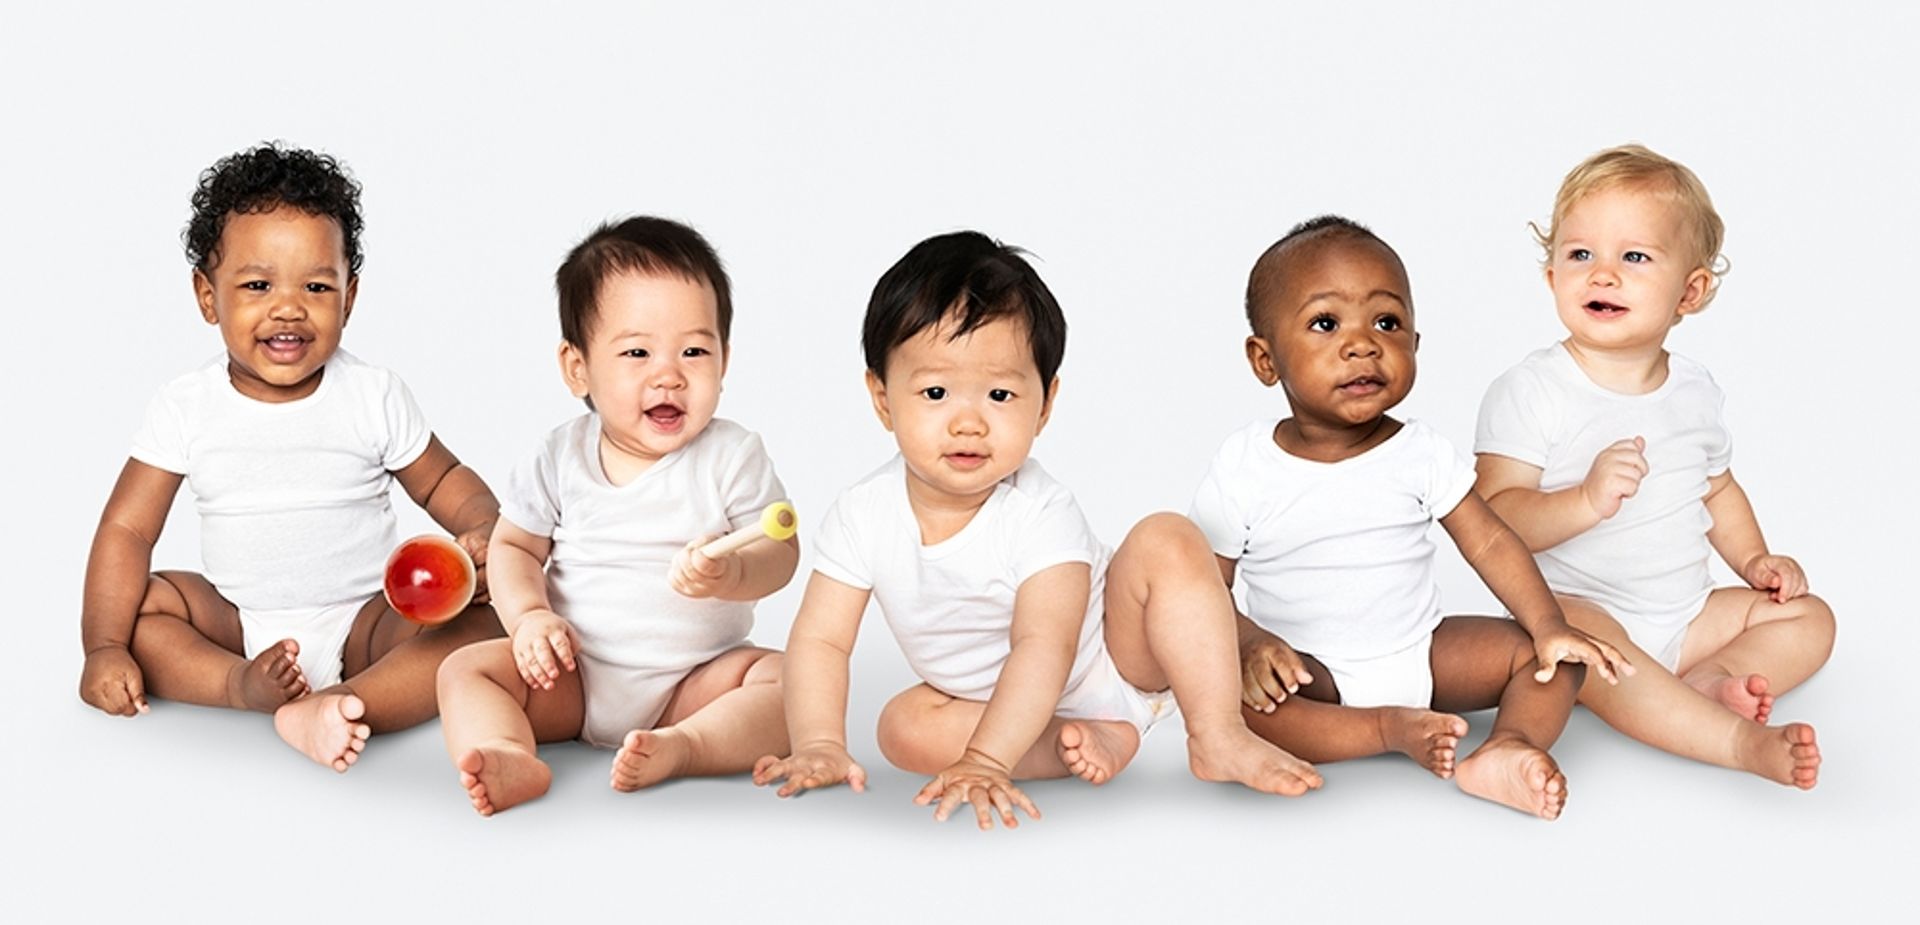 Why is it racist to wonder what skin colour your child will have?